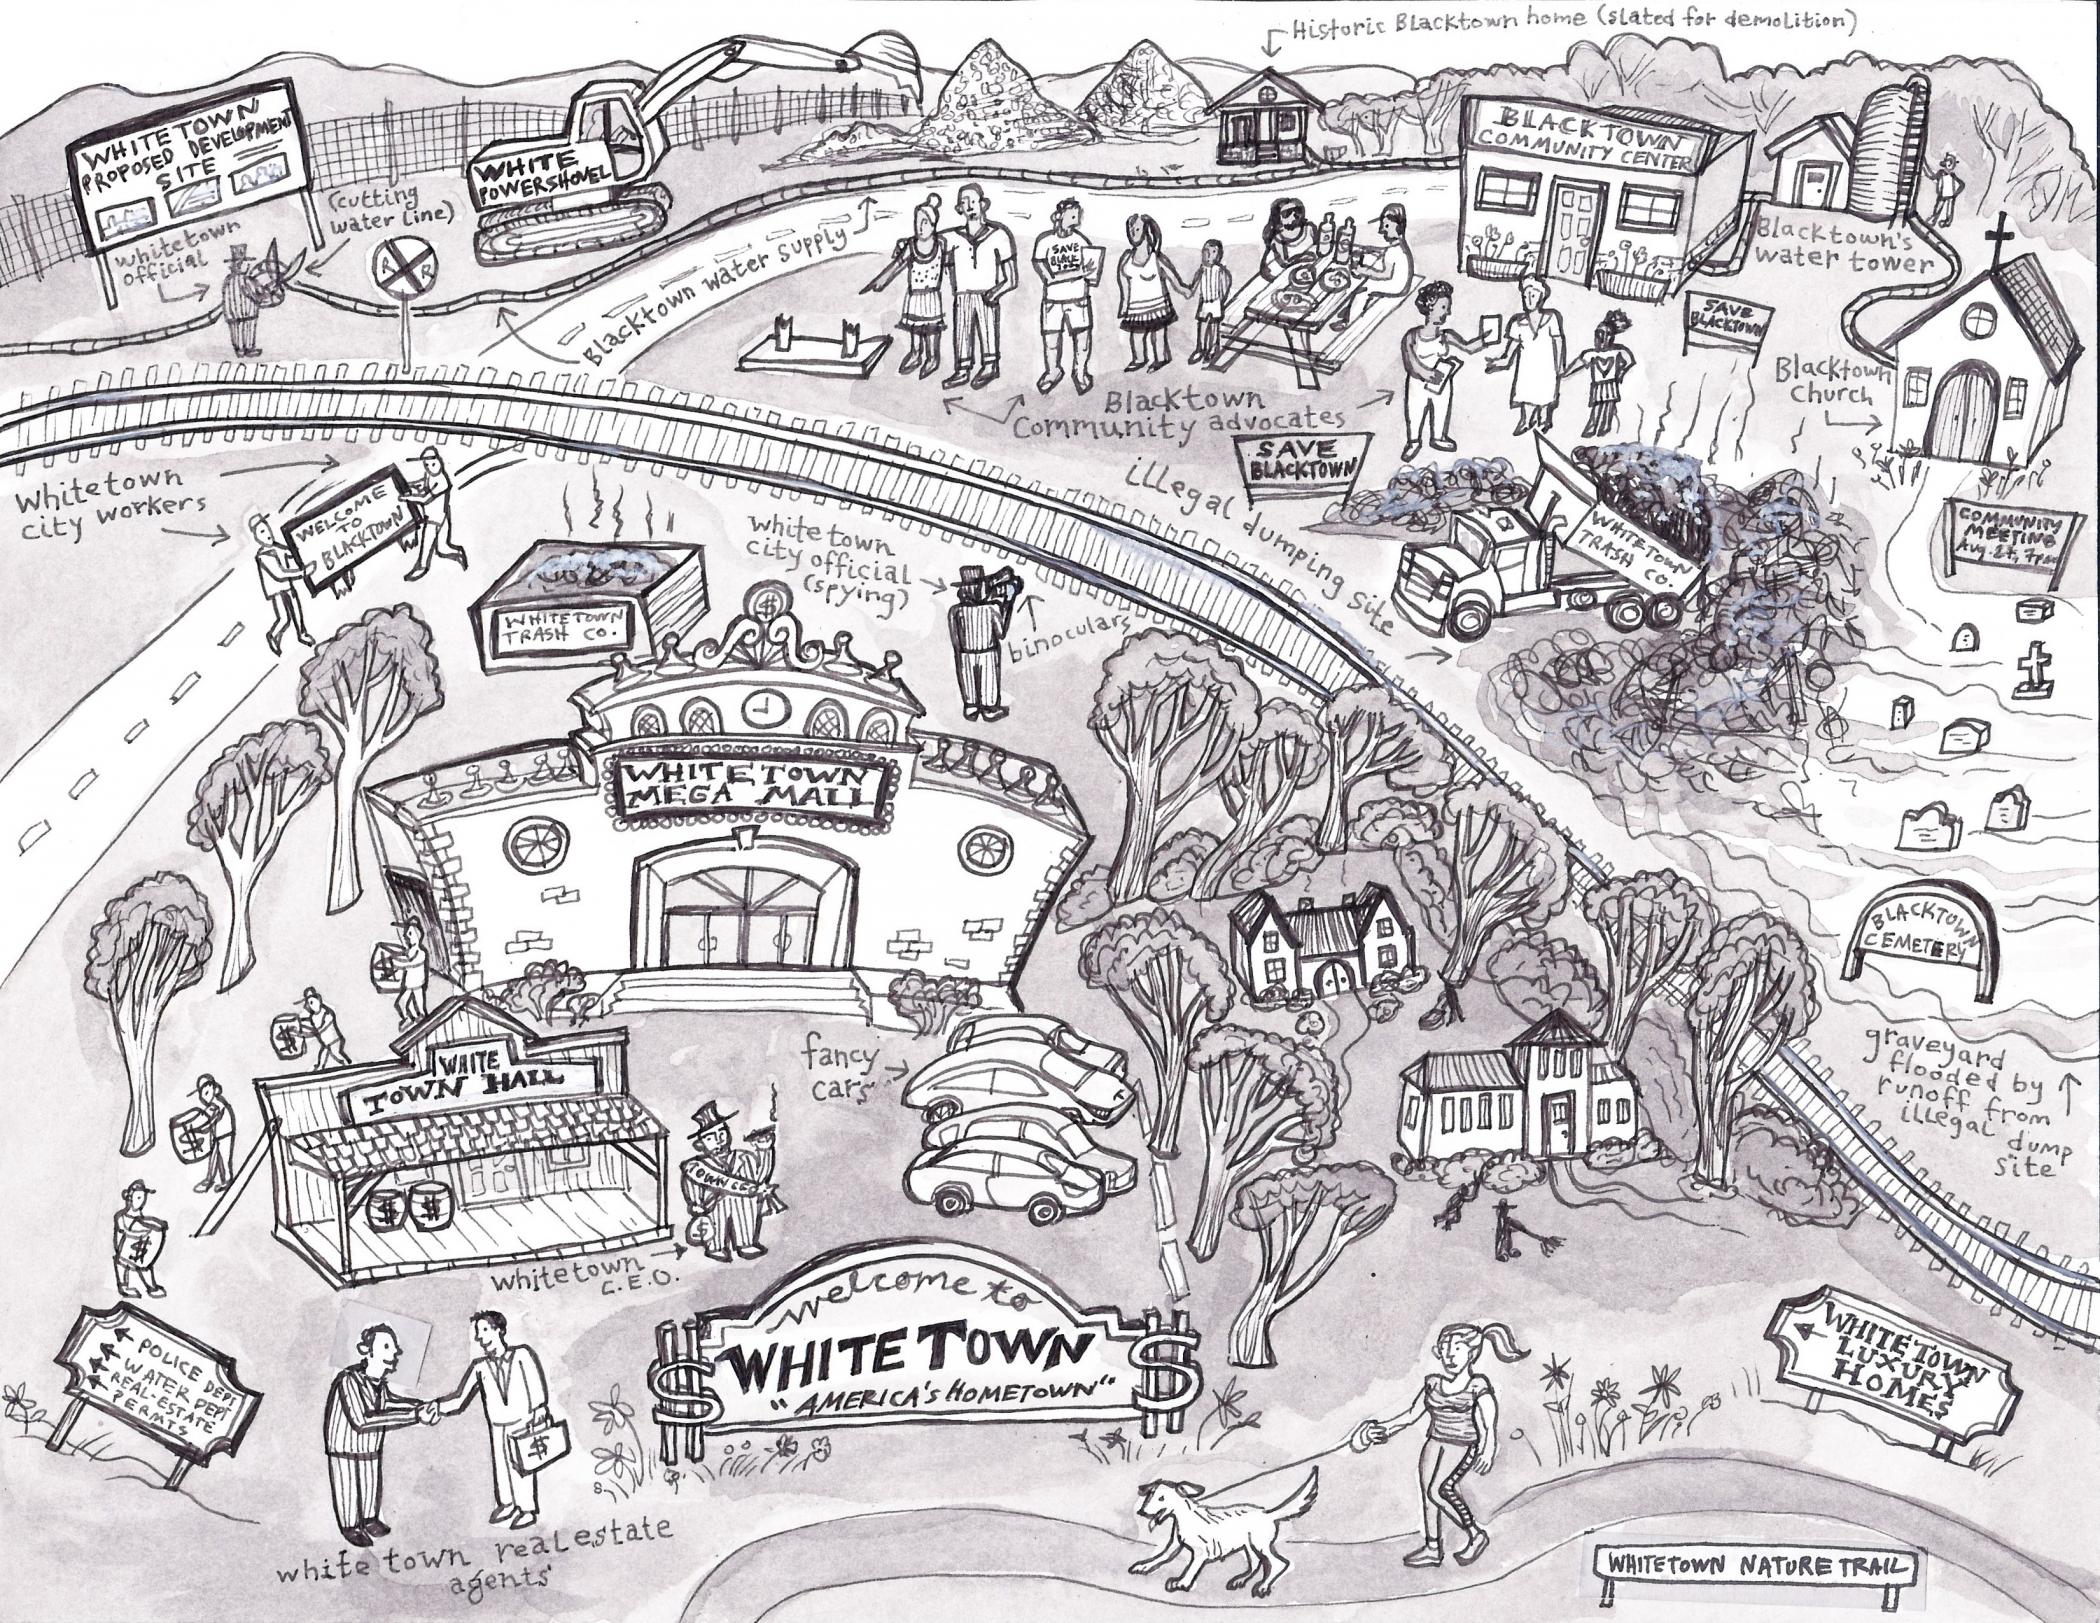 A black and white illustration shows various components of "Blacktown" and "Whitetown," separated by train tracks and showing cleanliness and prosperity in "White Town" but dumping and other nuisances in "Black Town"